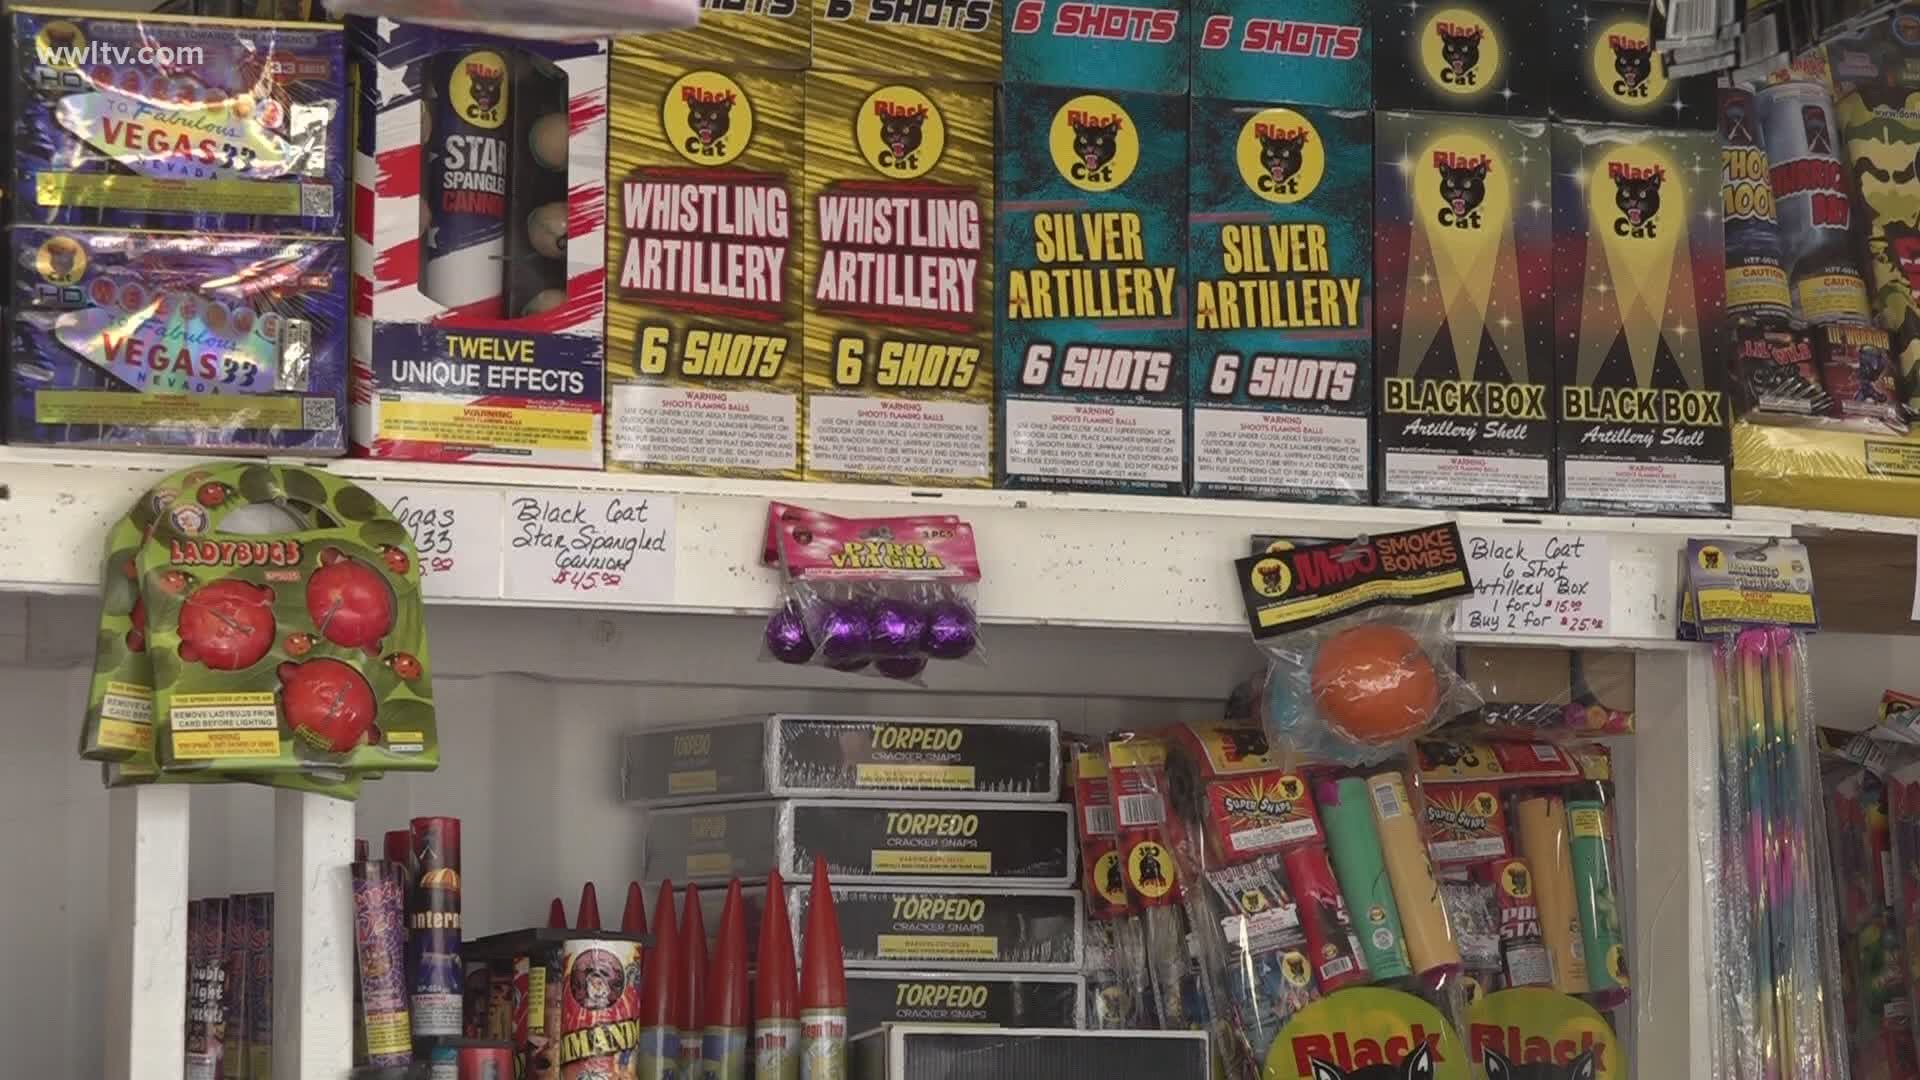 "We've had early sales which is surprising, usually fireworks is a last minute business," Templet said.